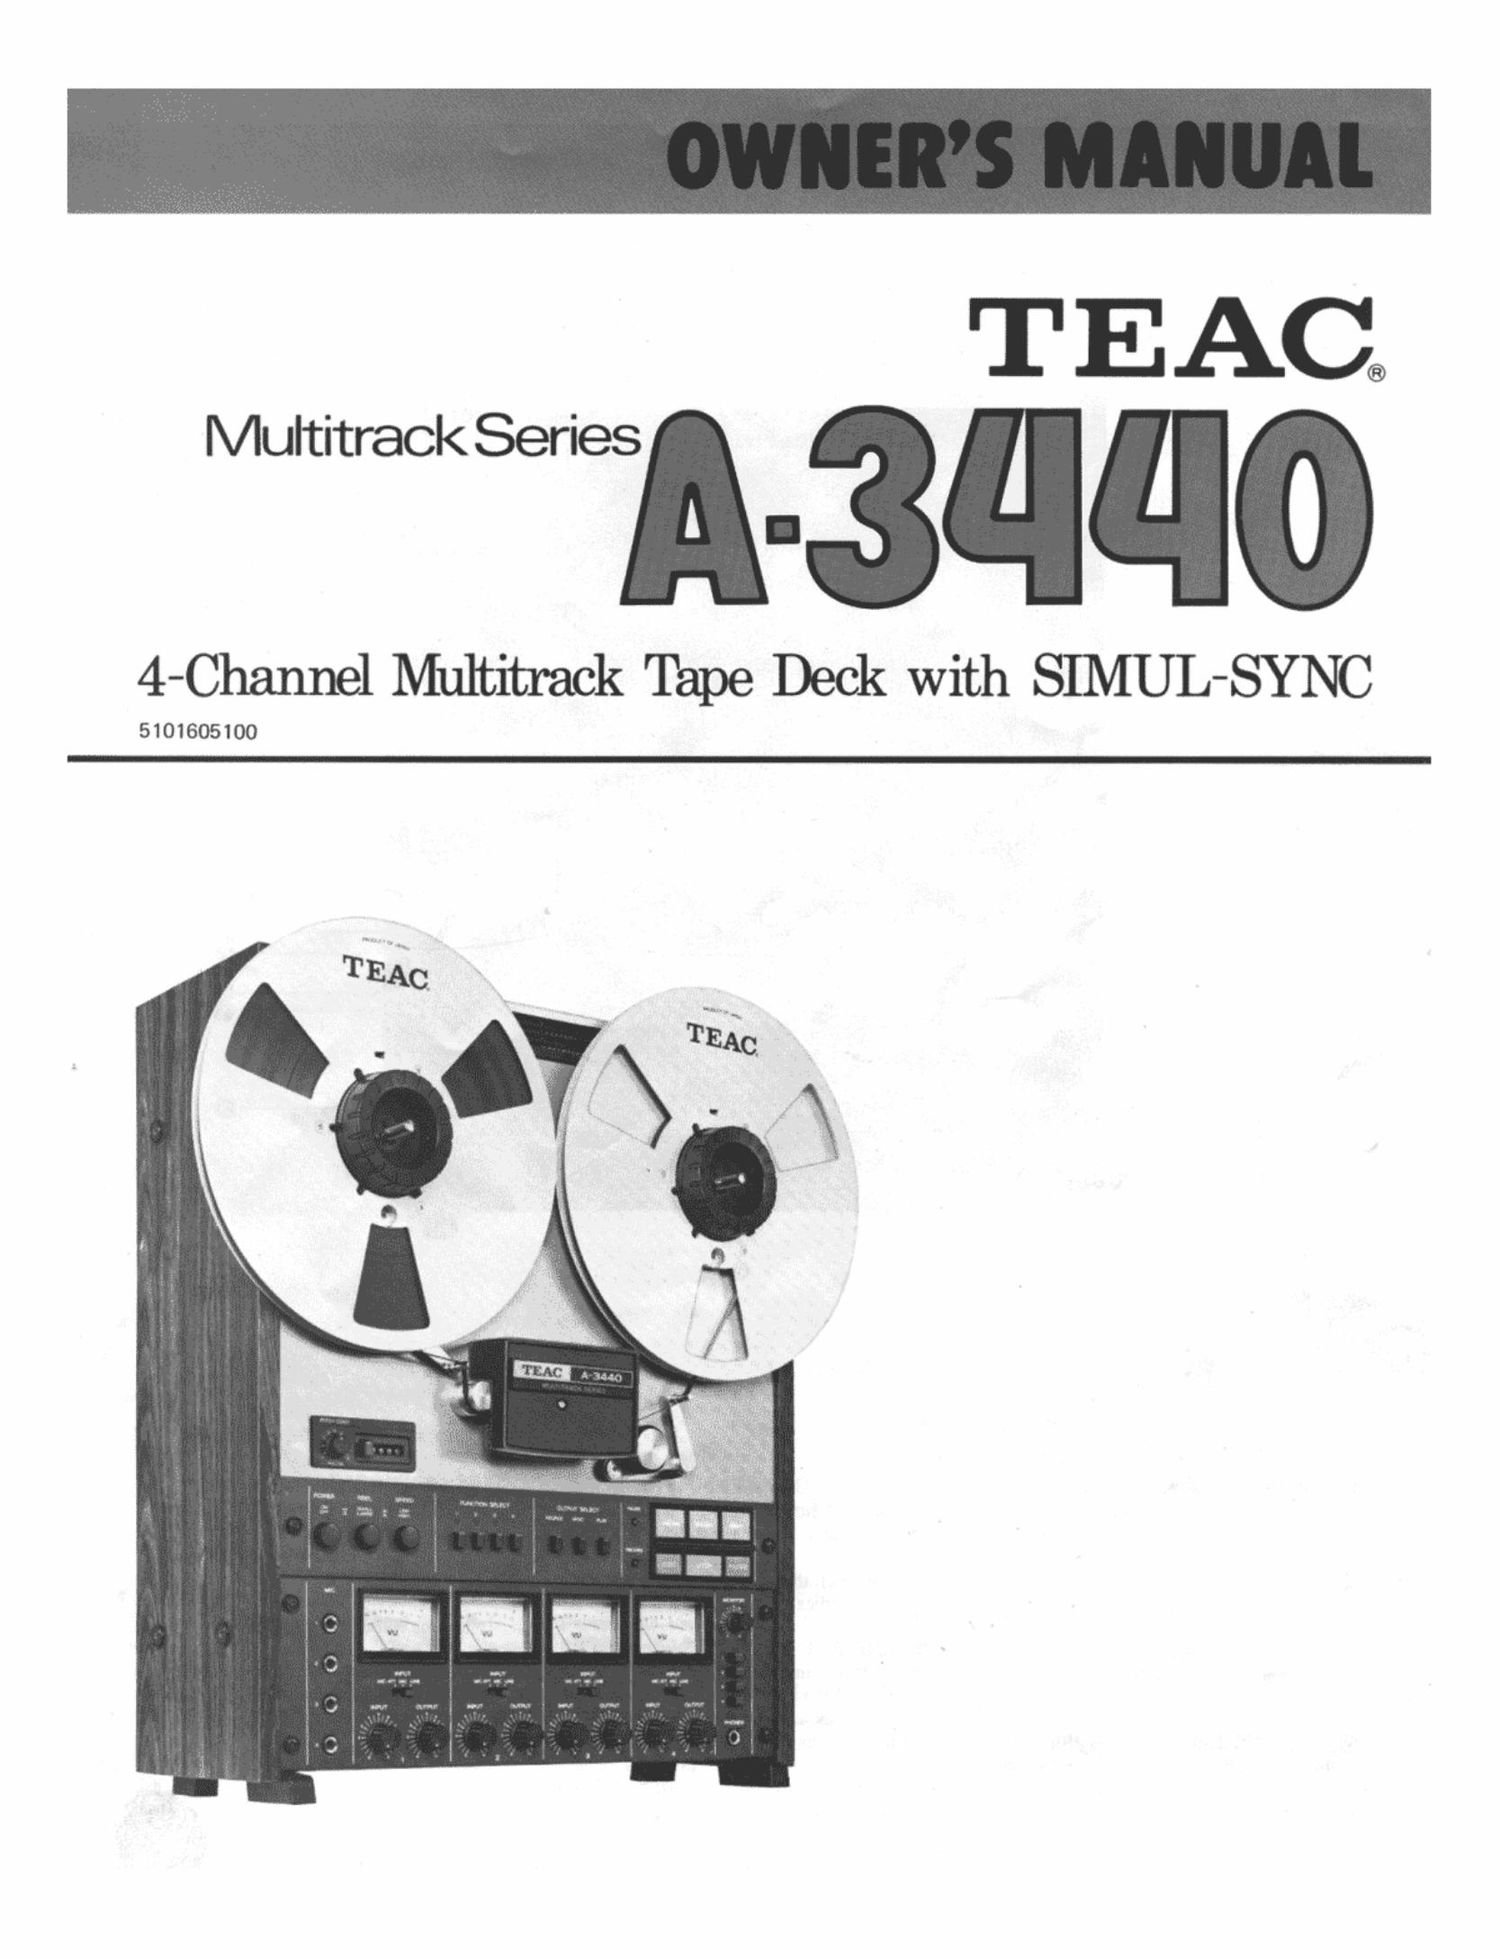 Teac A 3440 Owners Manual